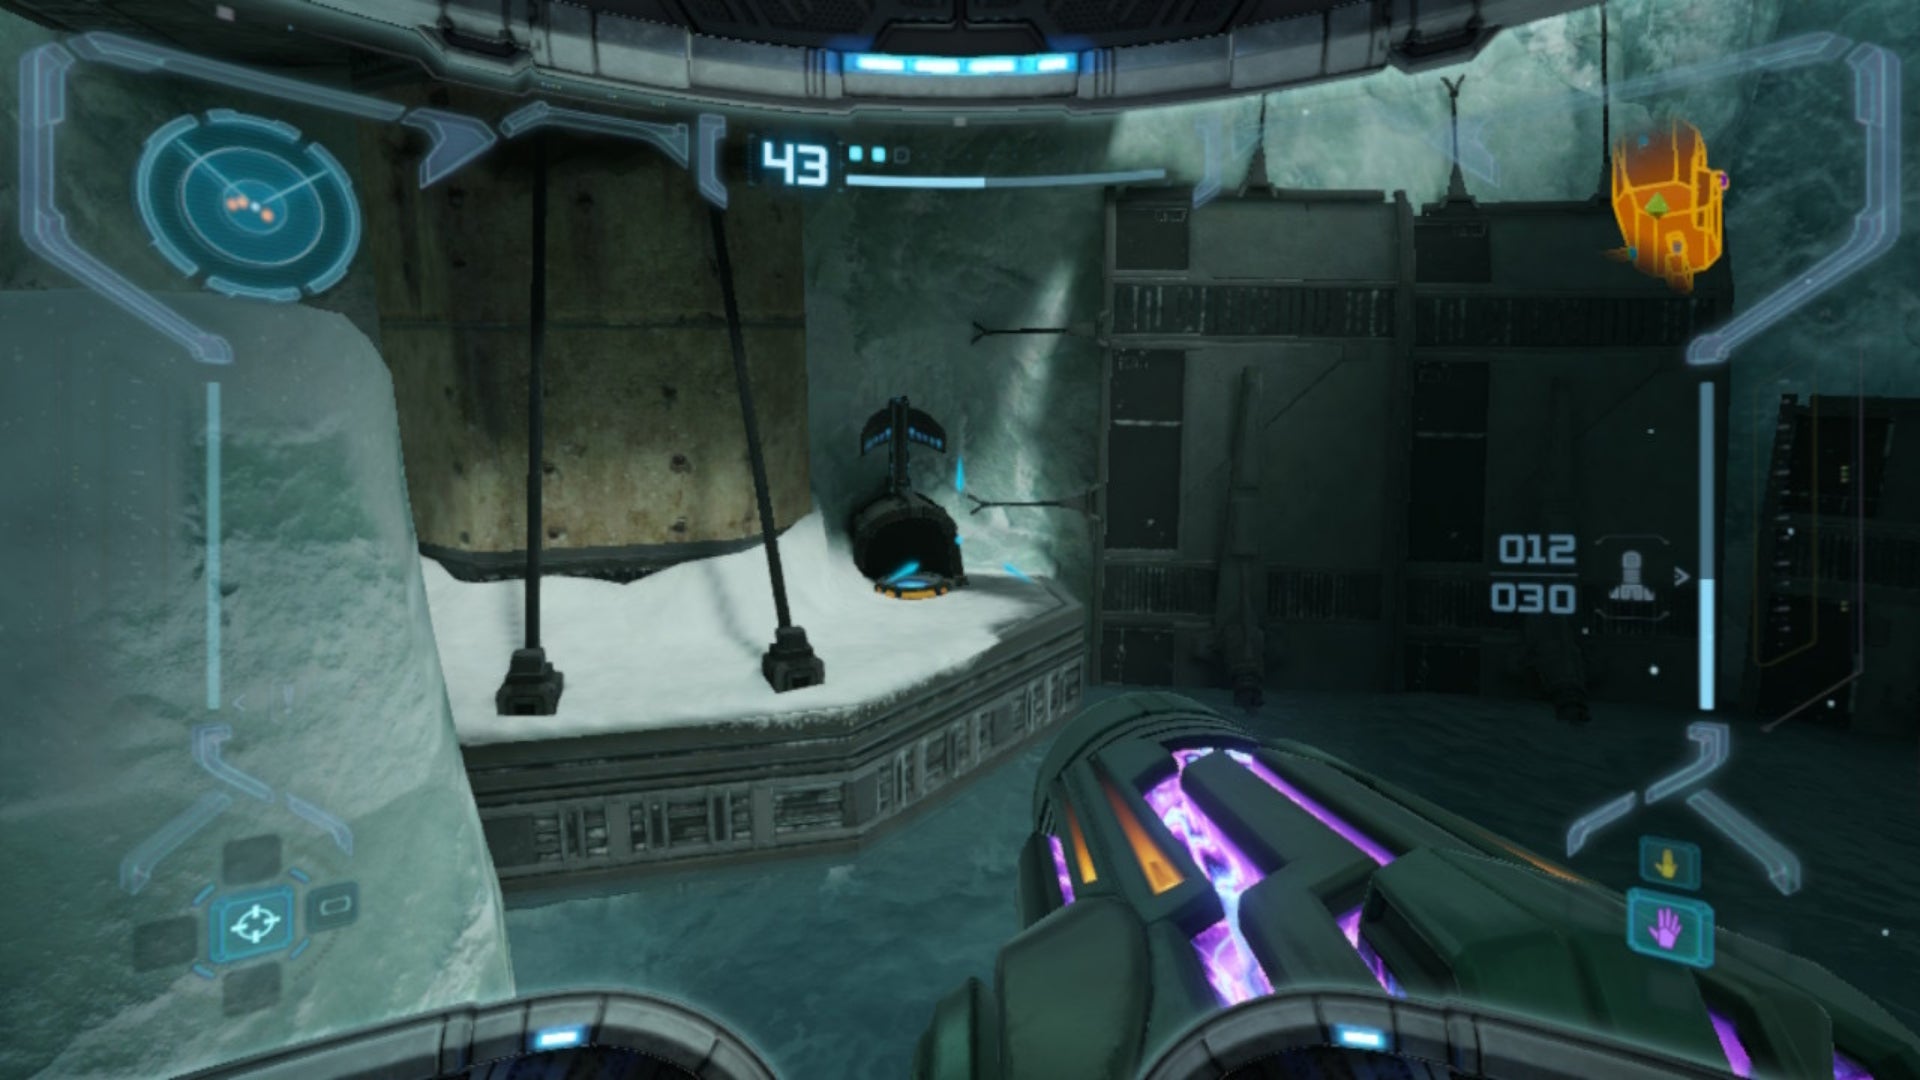 Samus aims at a spinning slot for the morph ball in Metroid Prime Remastered